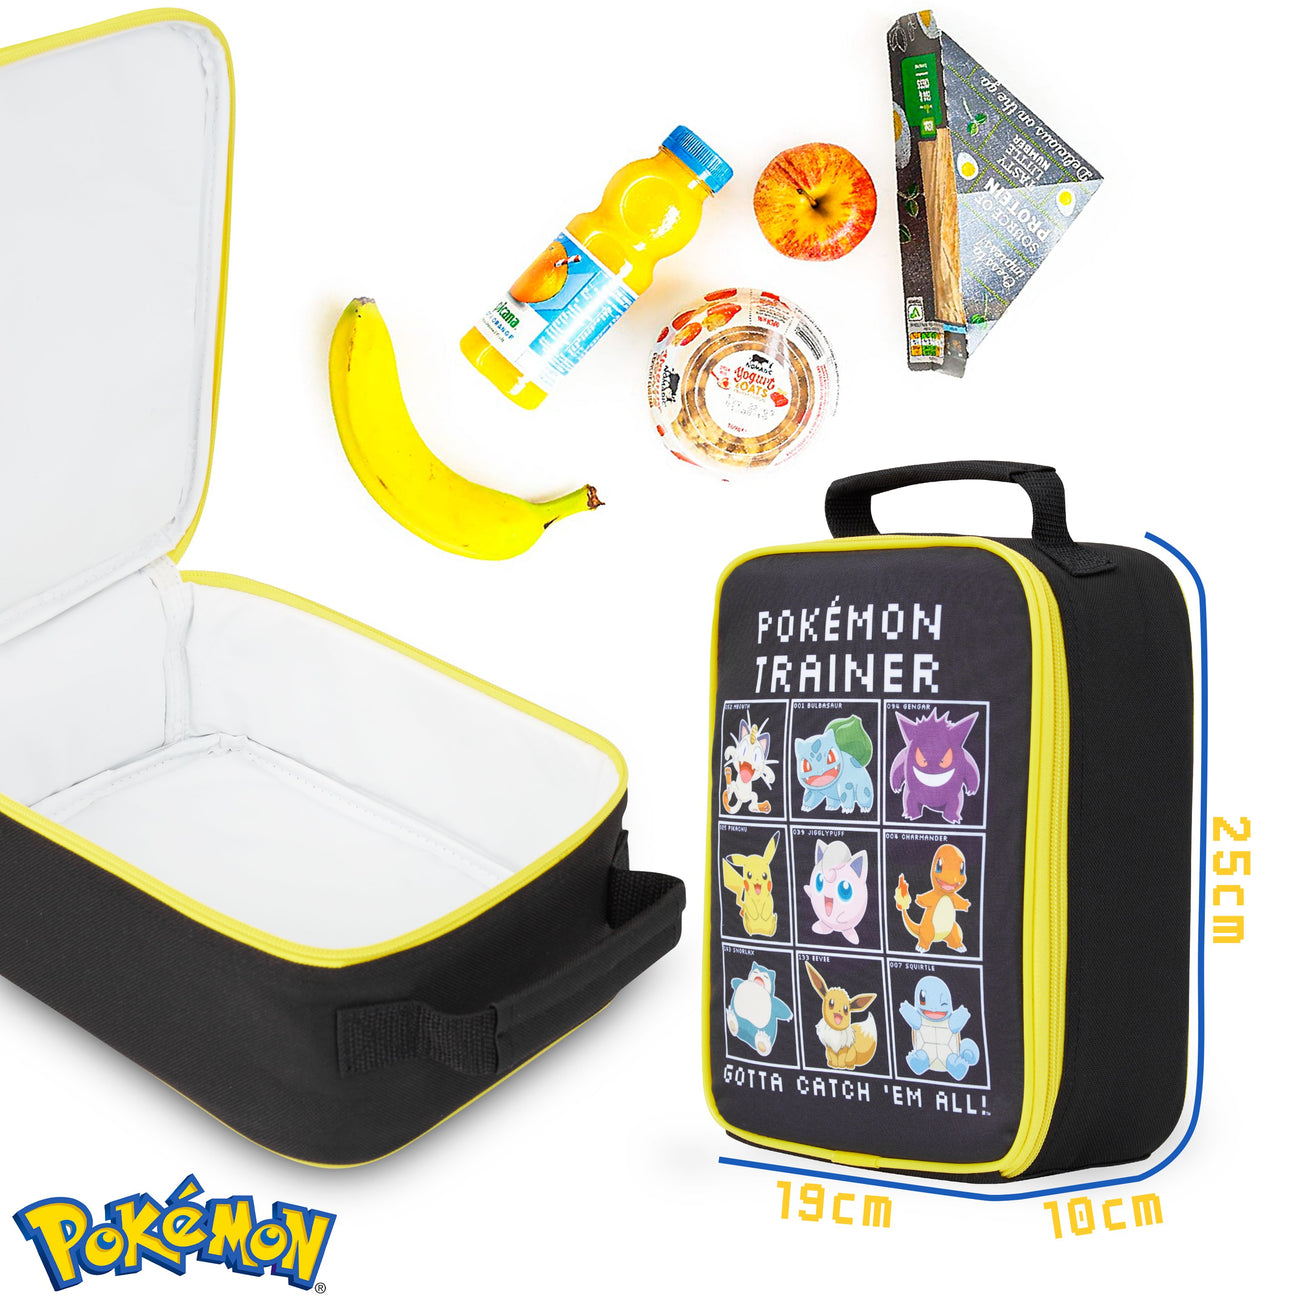 Pokémon Lunch Box, Blue Lunch Bag For Kids And Teens With Pikachu,  Squirtle, Bulbasaur and Charmender